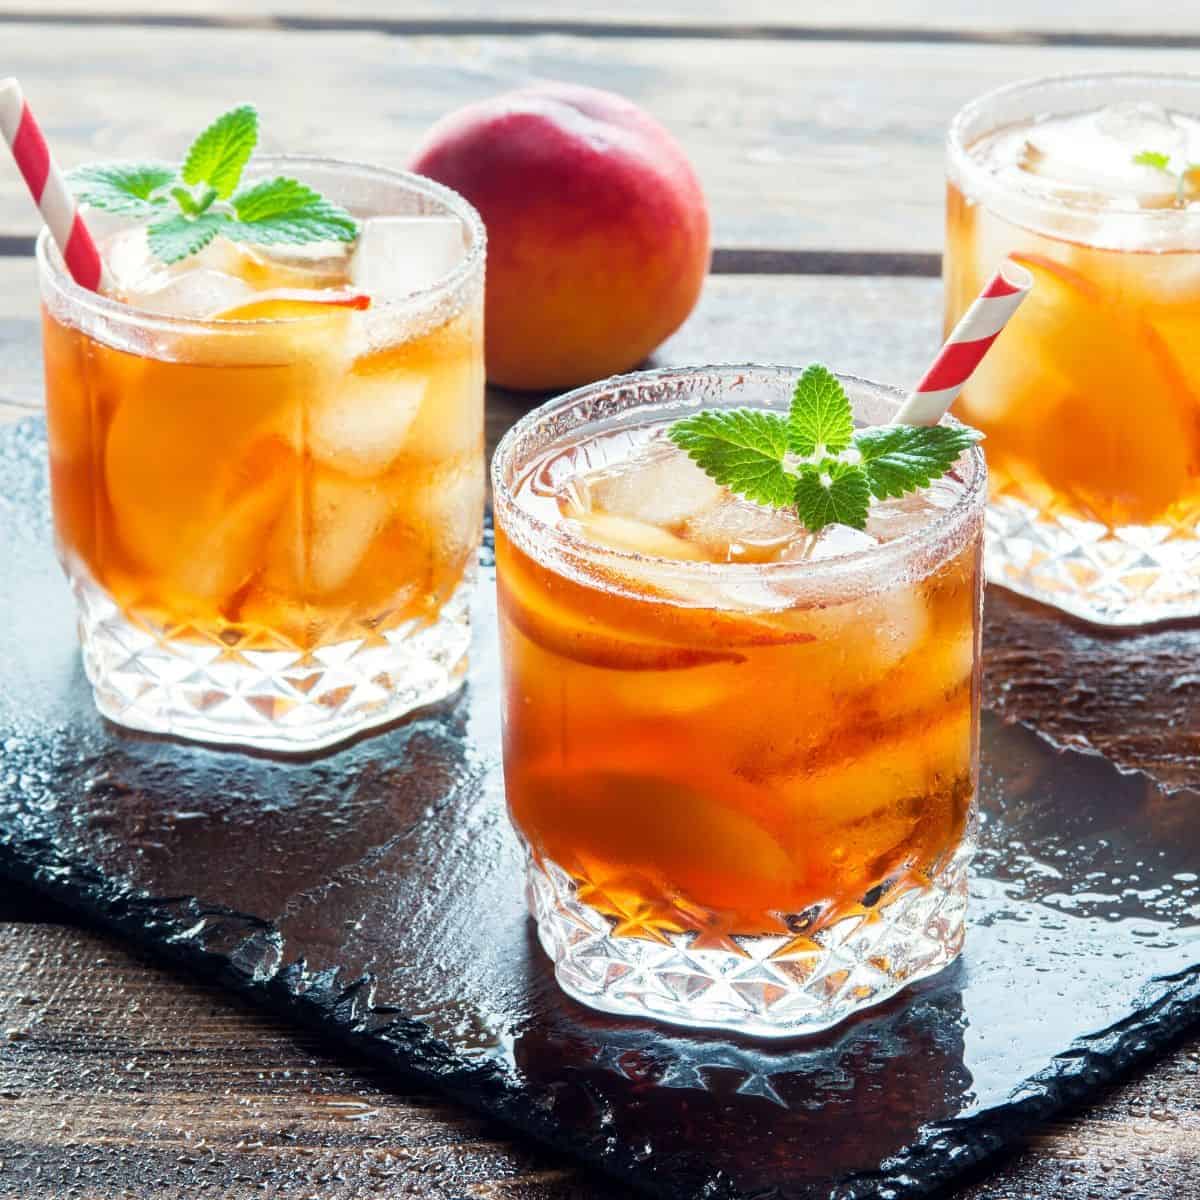 How to Make Iced Tea in Quick and Easy Ways